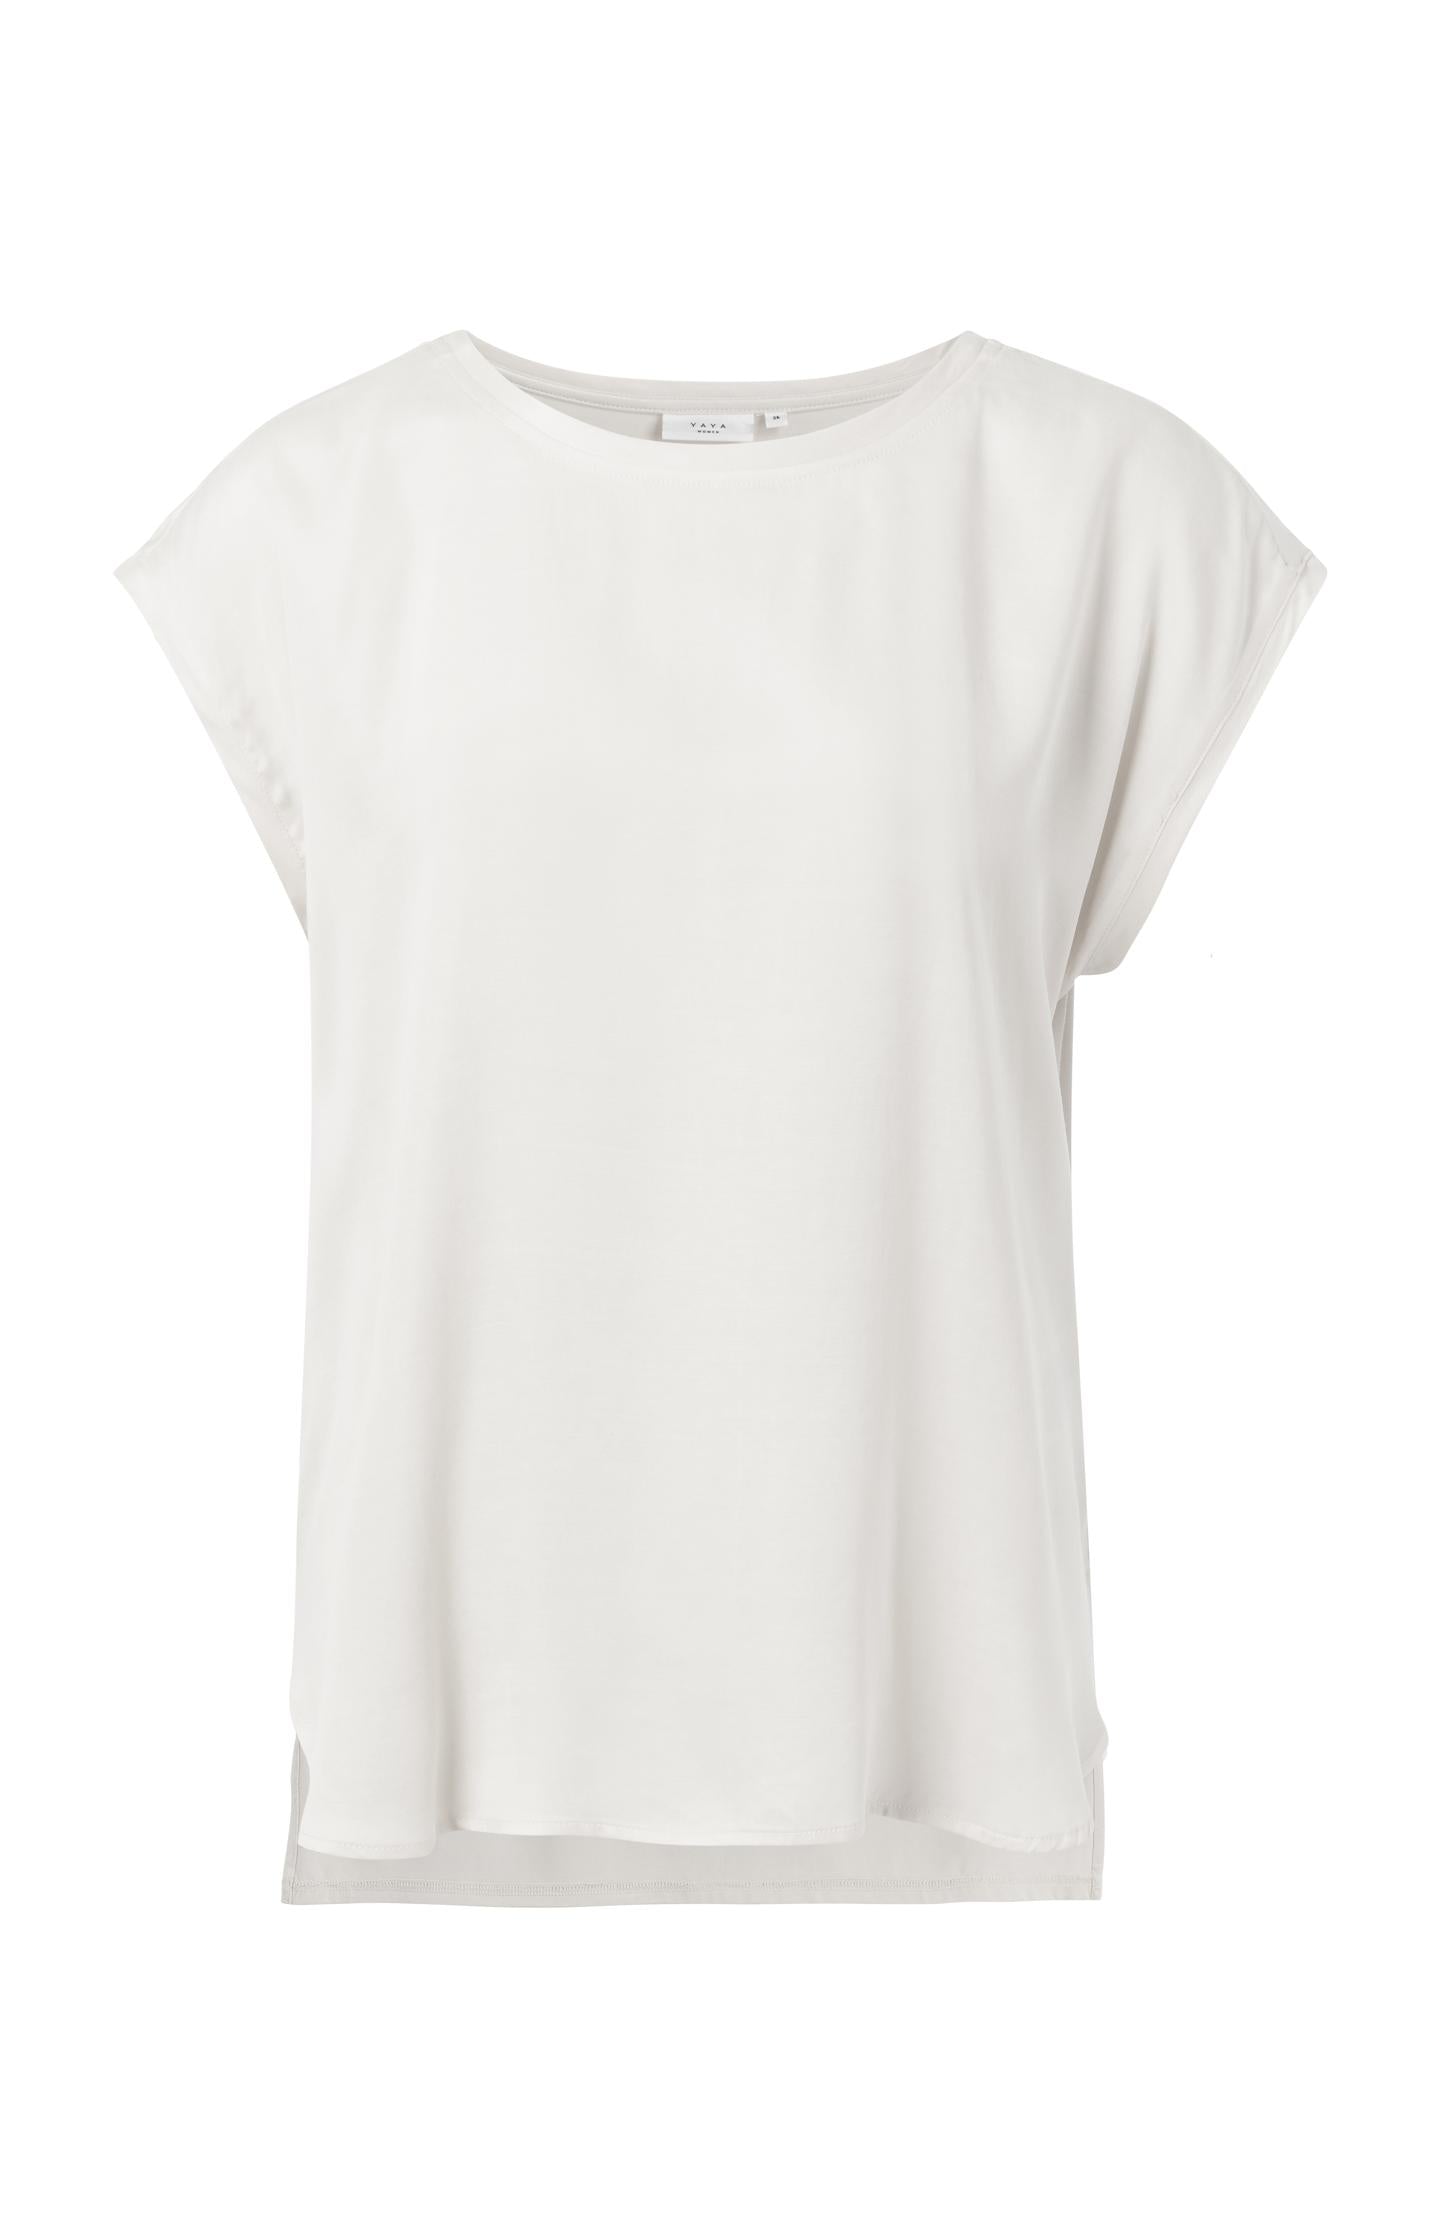 Cupro blend fabric mix T-shirt with rounded hems - Type: product